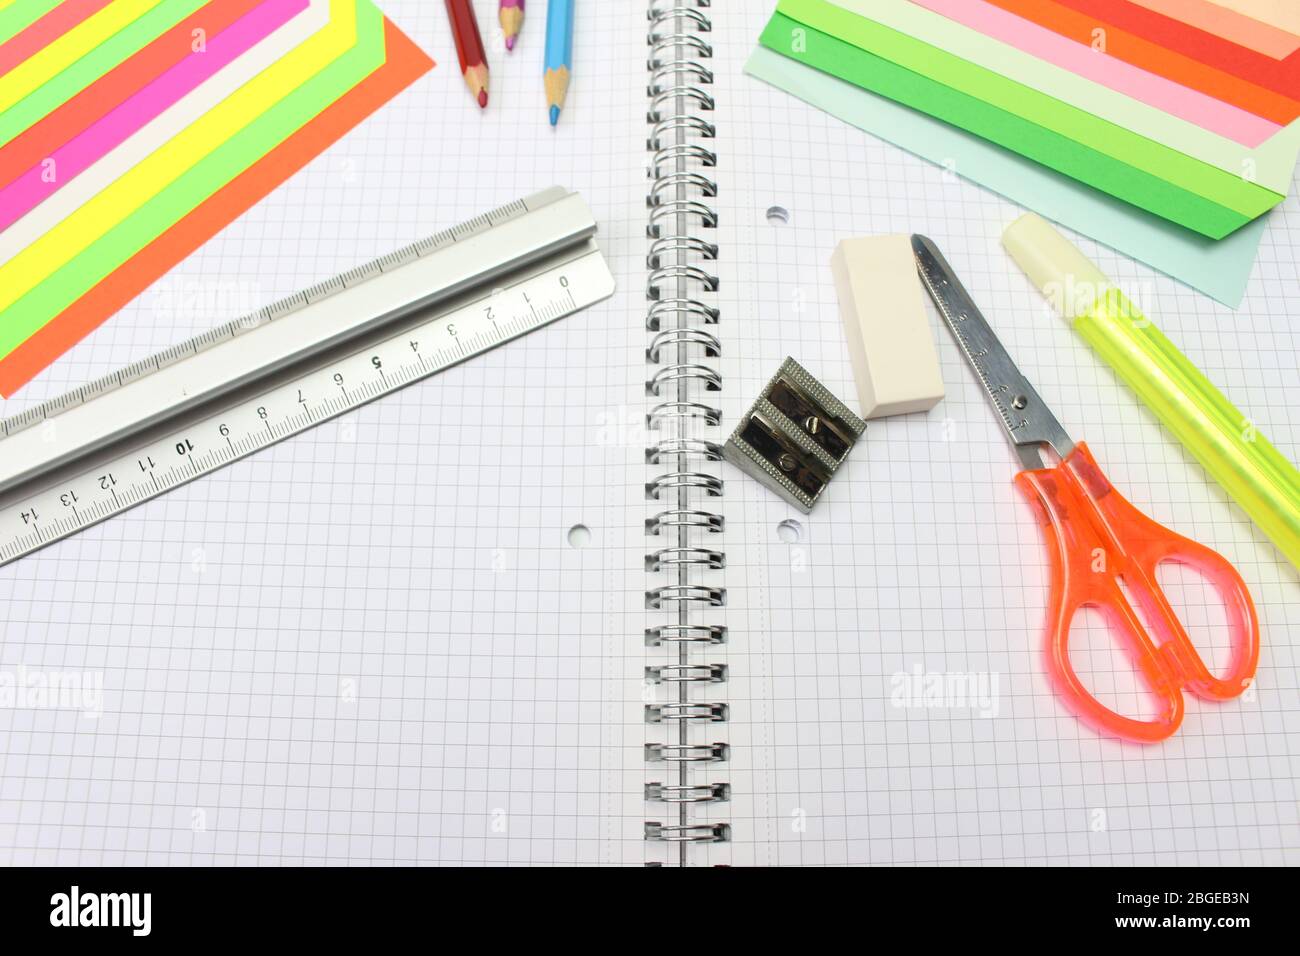 On the desk the school supplies with a spiral block and colored sheets. Stock Photo